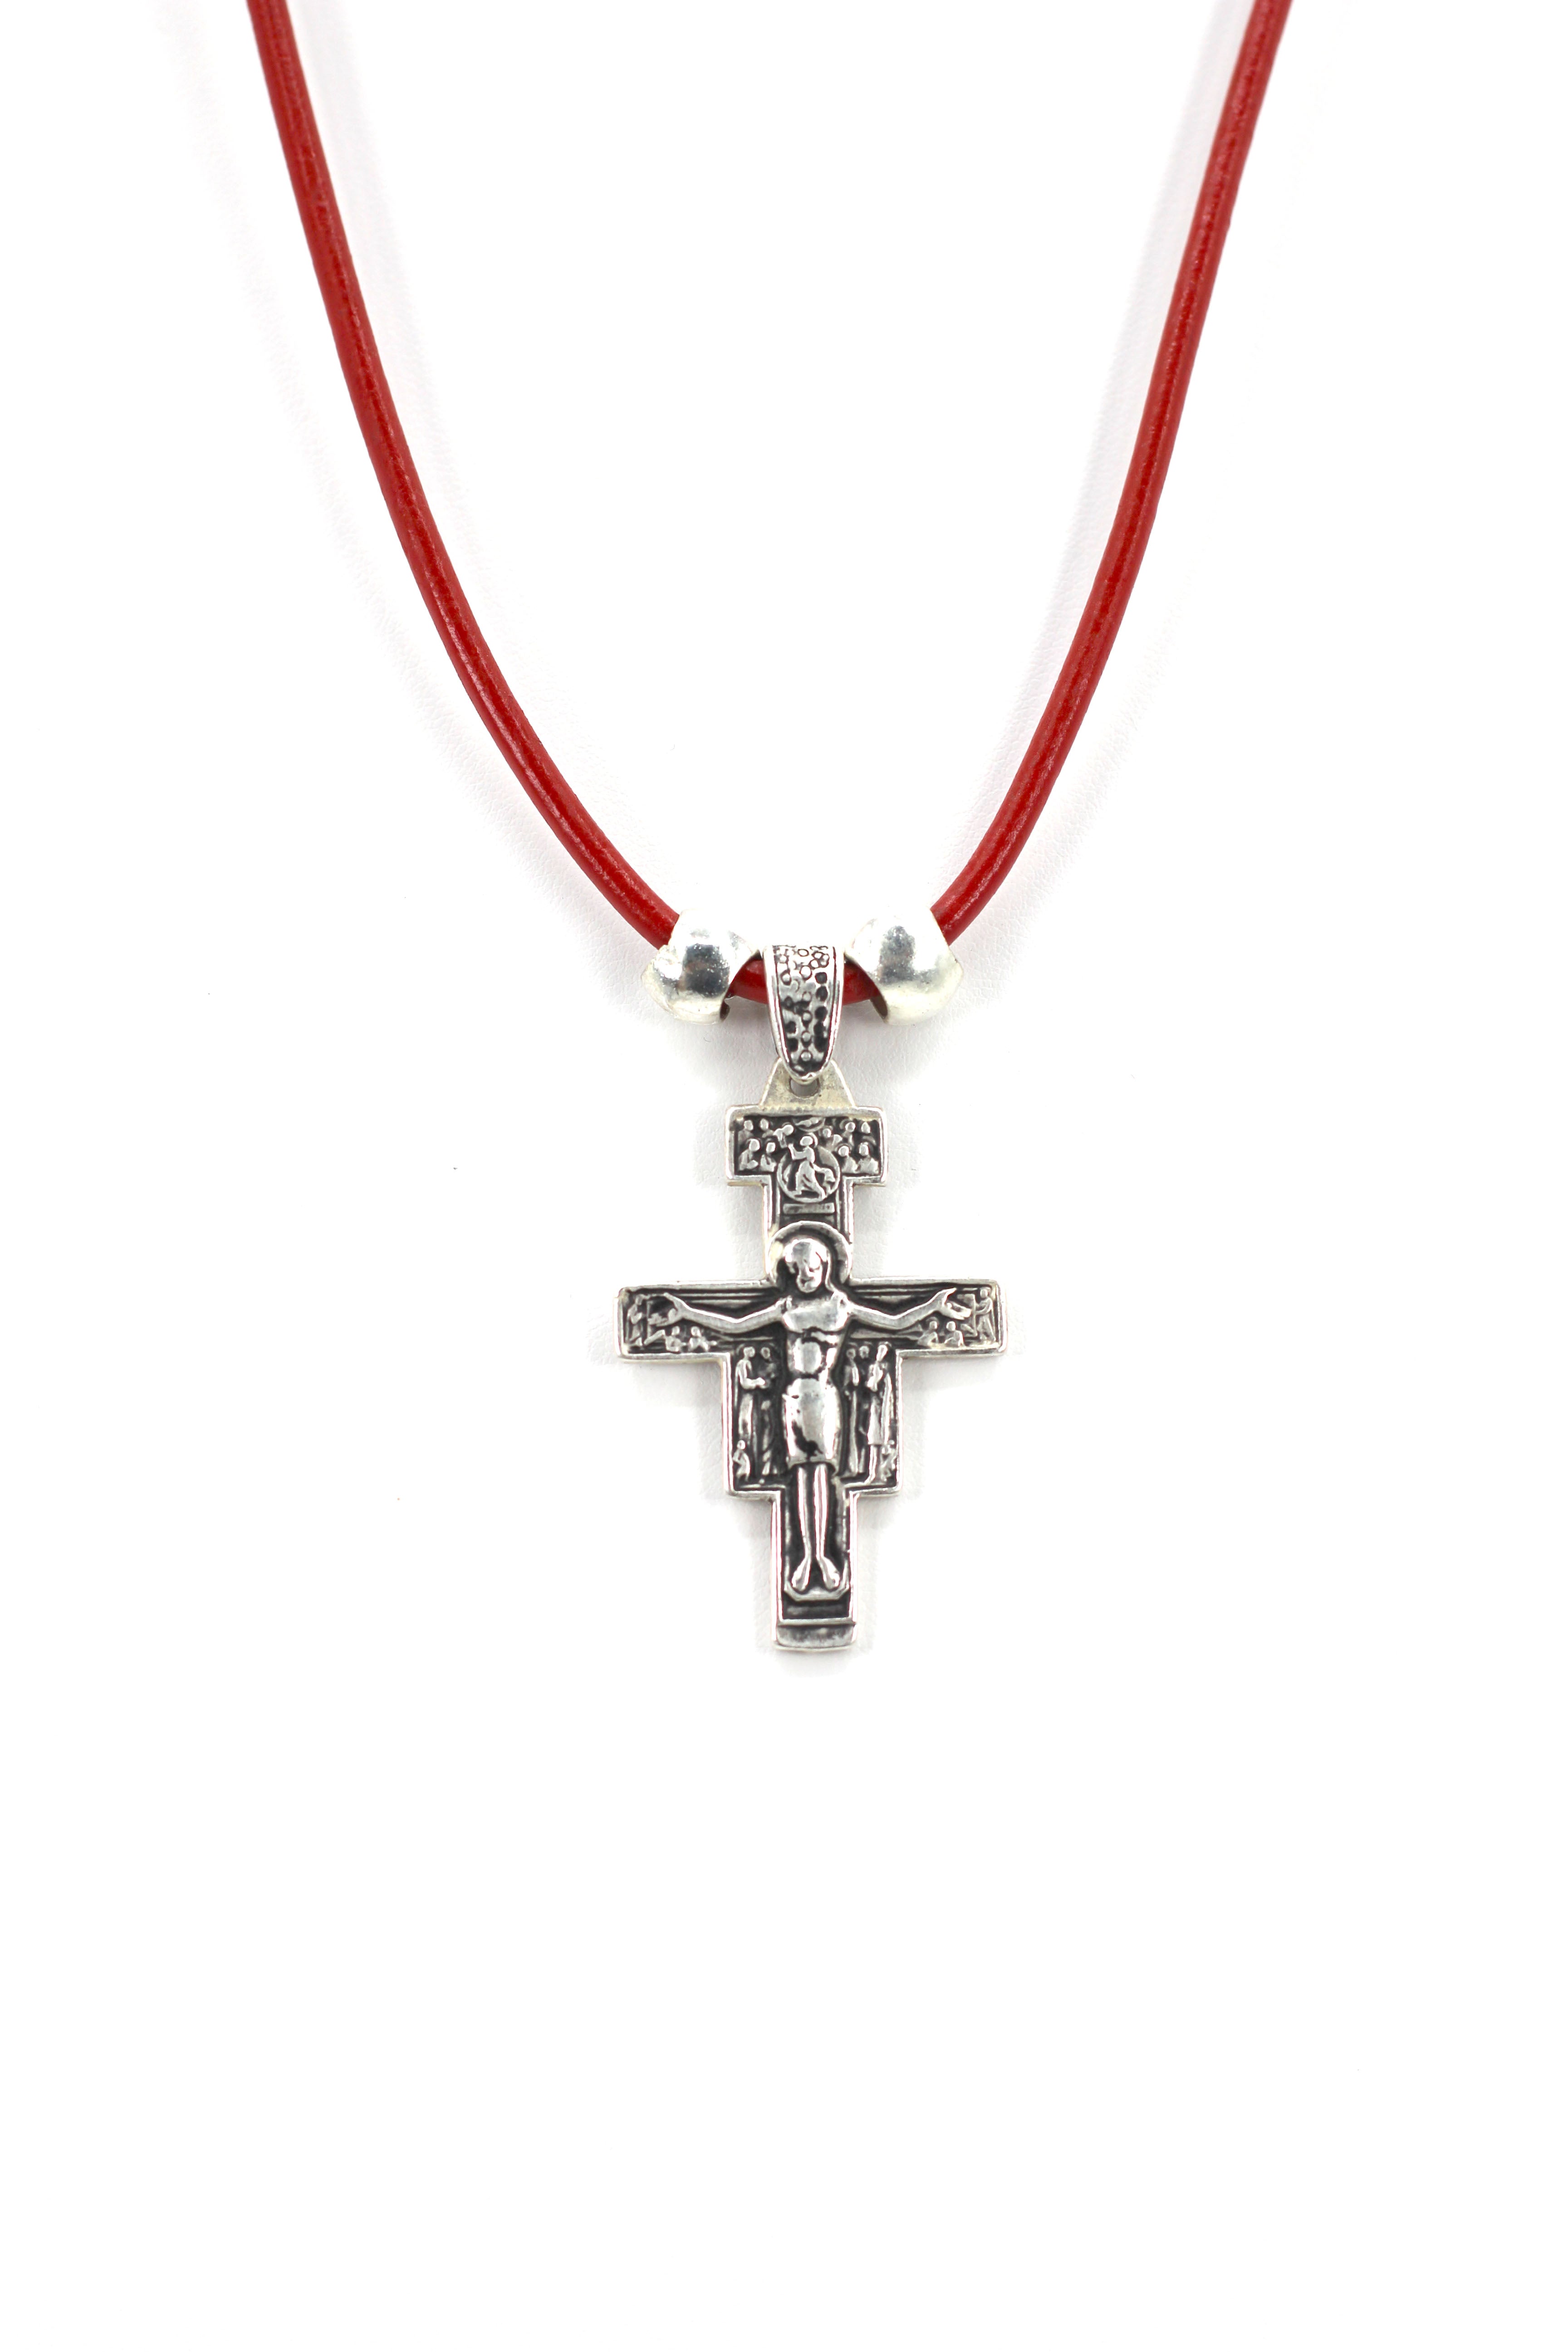 Vintage The San Damiano / San Francisco Cross Necklace Handmade Jewelry with Genuine Leather Strap by Graciela's Collection